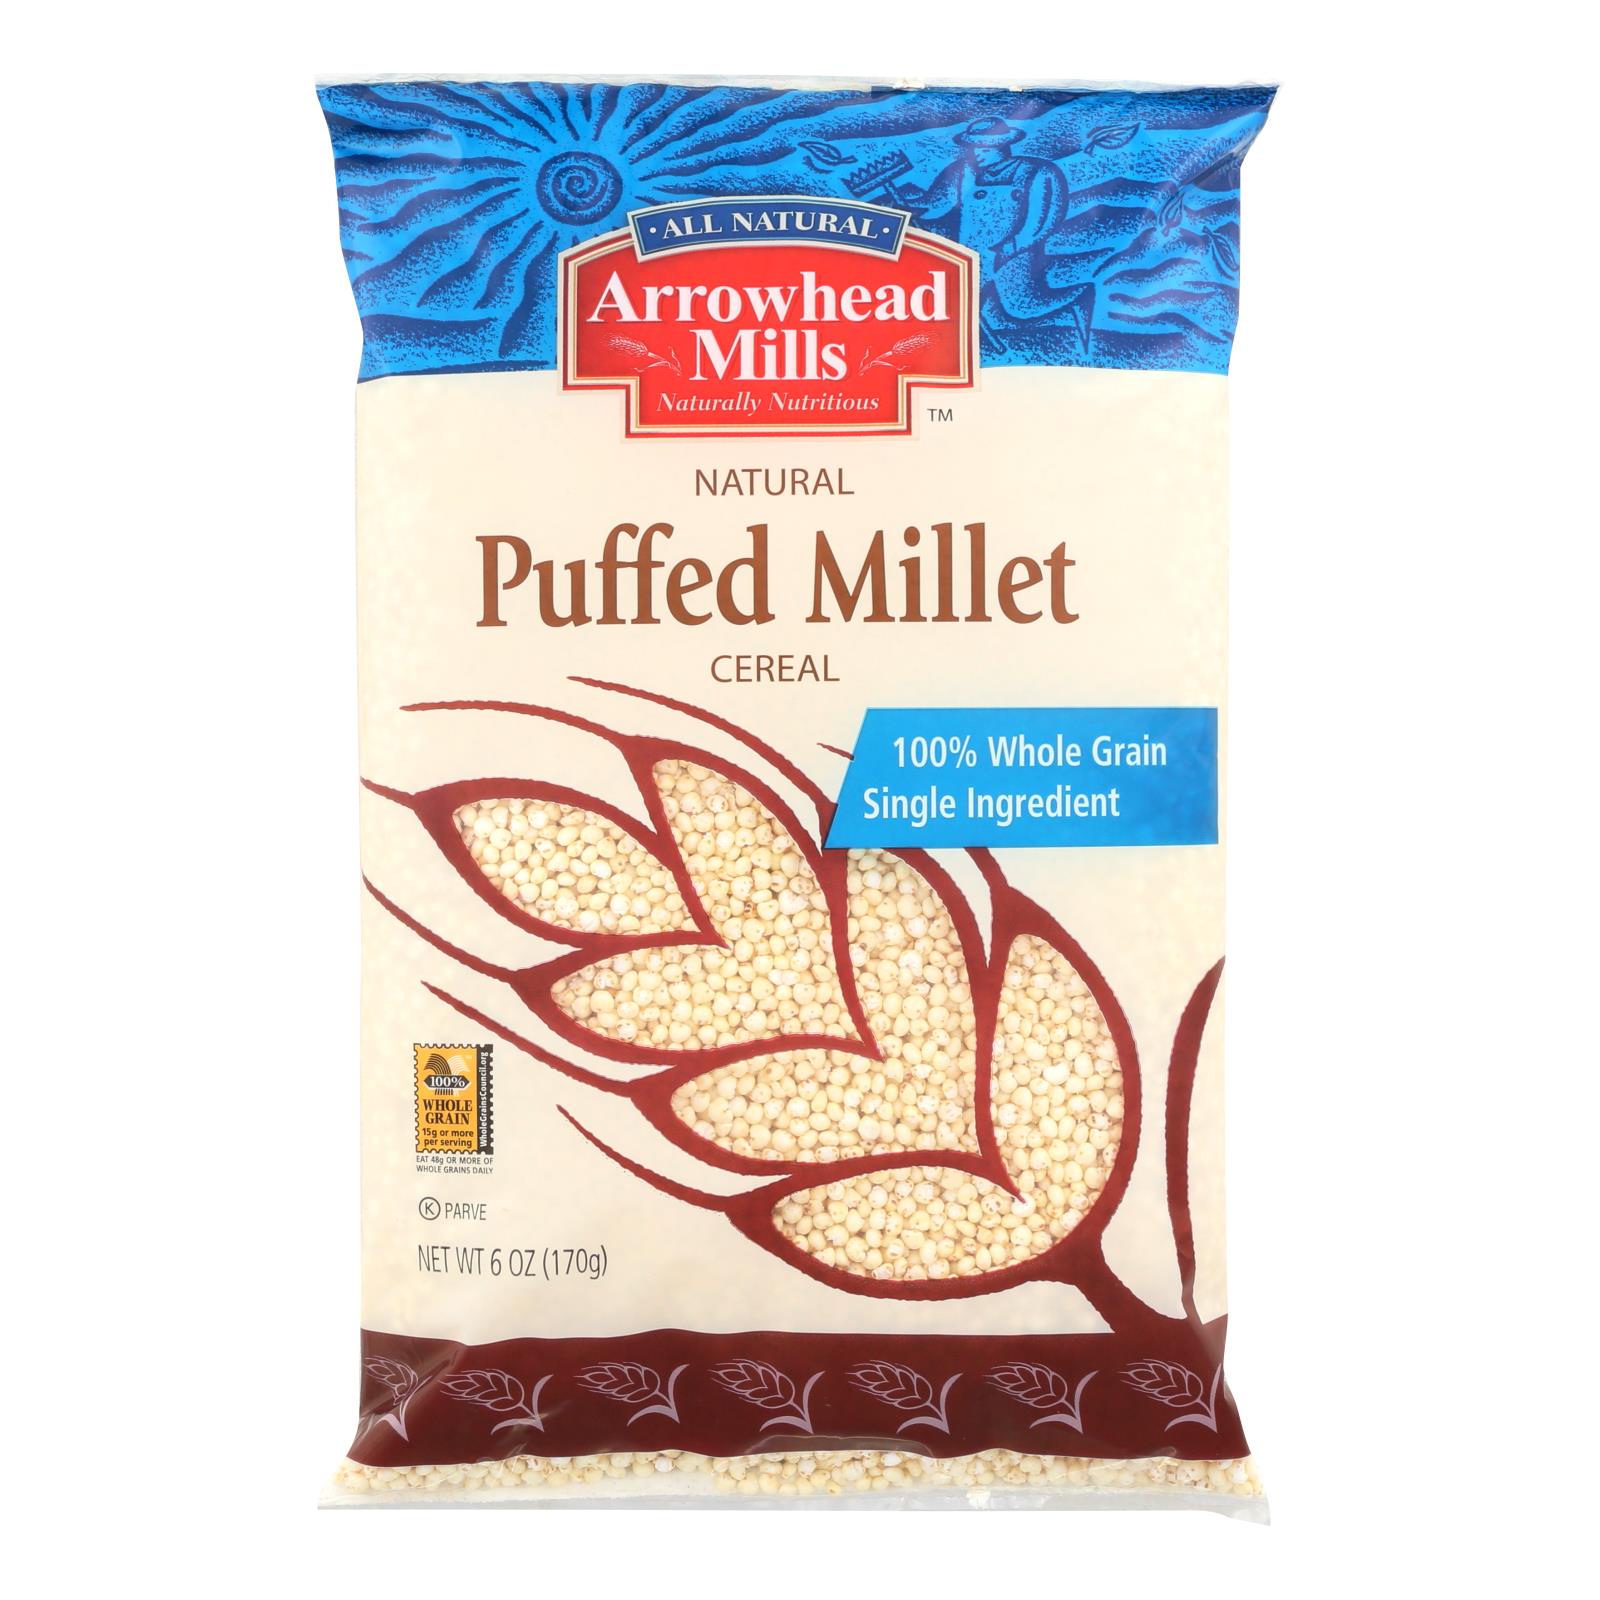 Arrowhead Mills, Arrowhead Mills - All Natural Puffed Millet Cereal - Case of 12 - 6 oz.